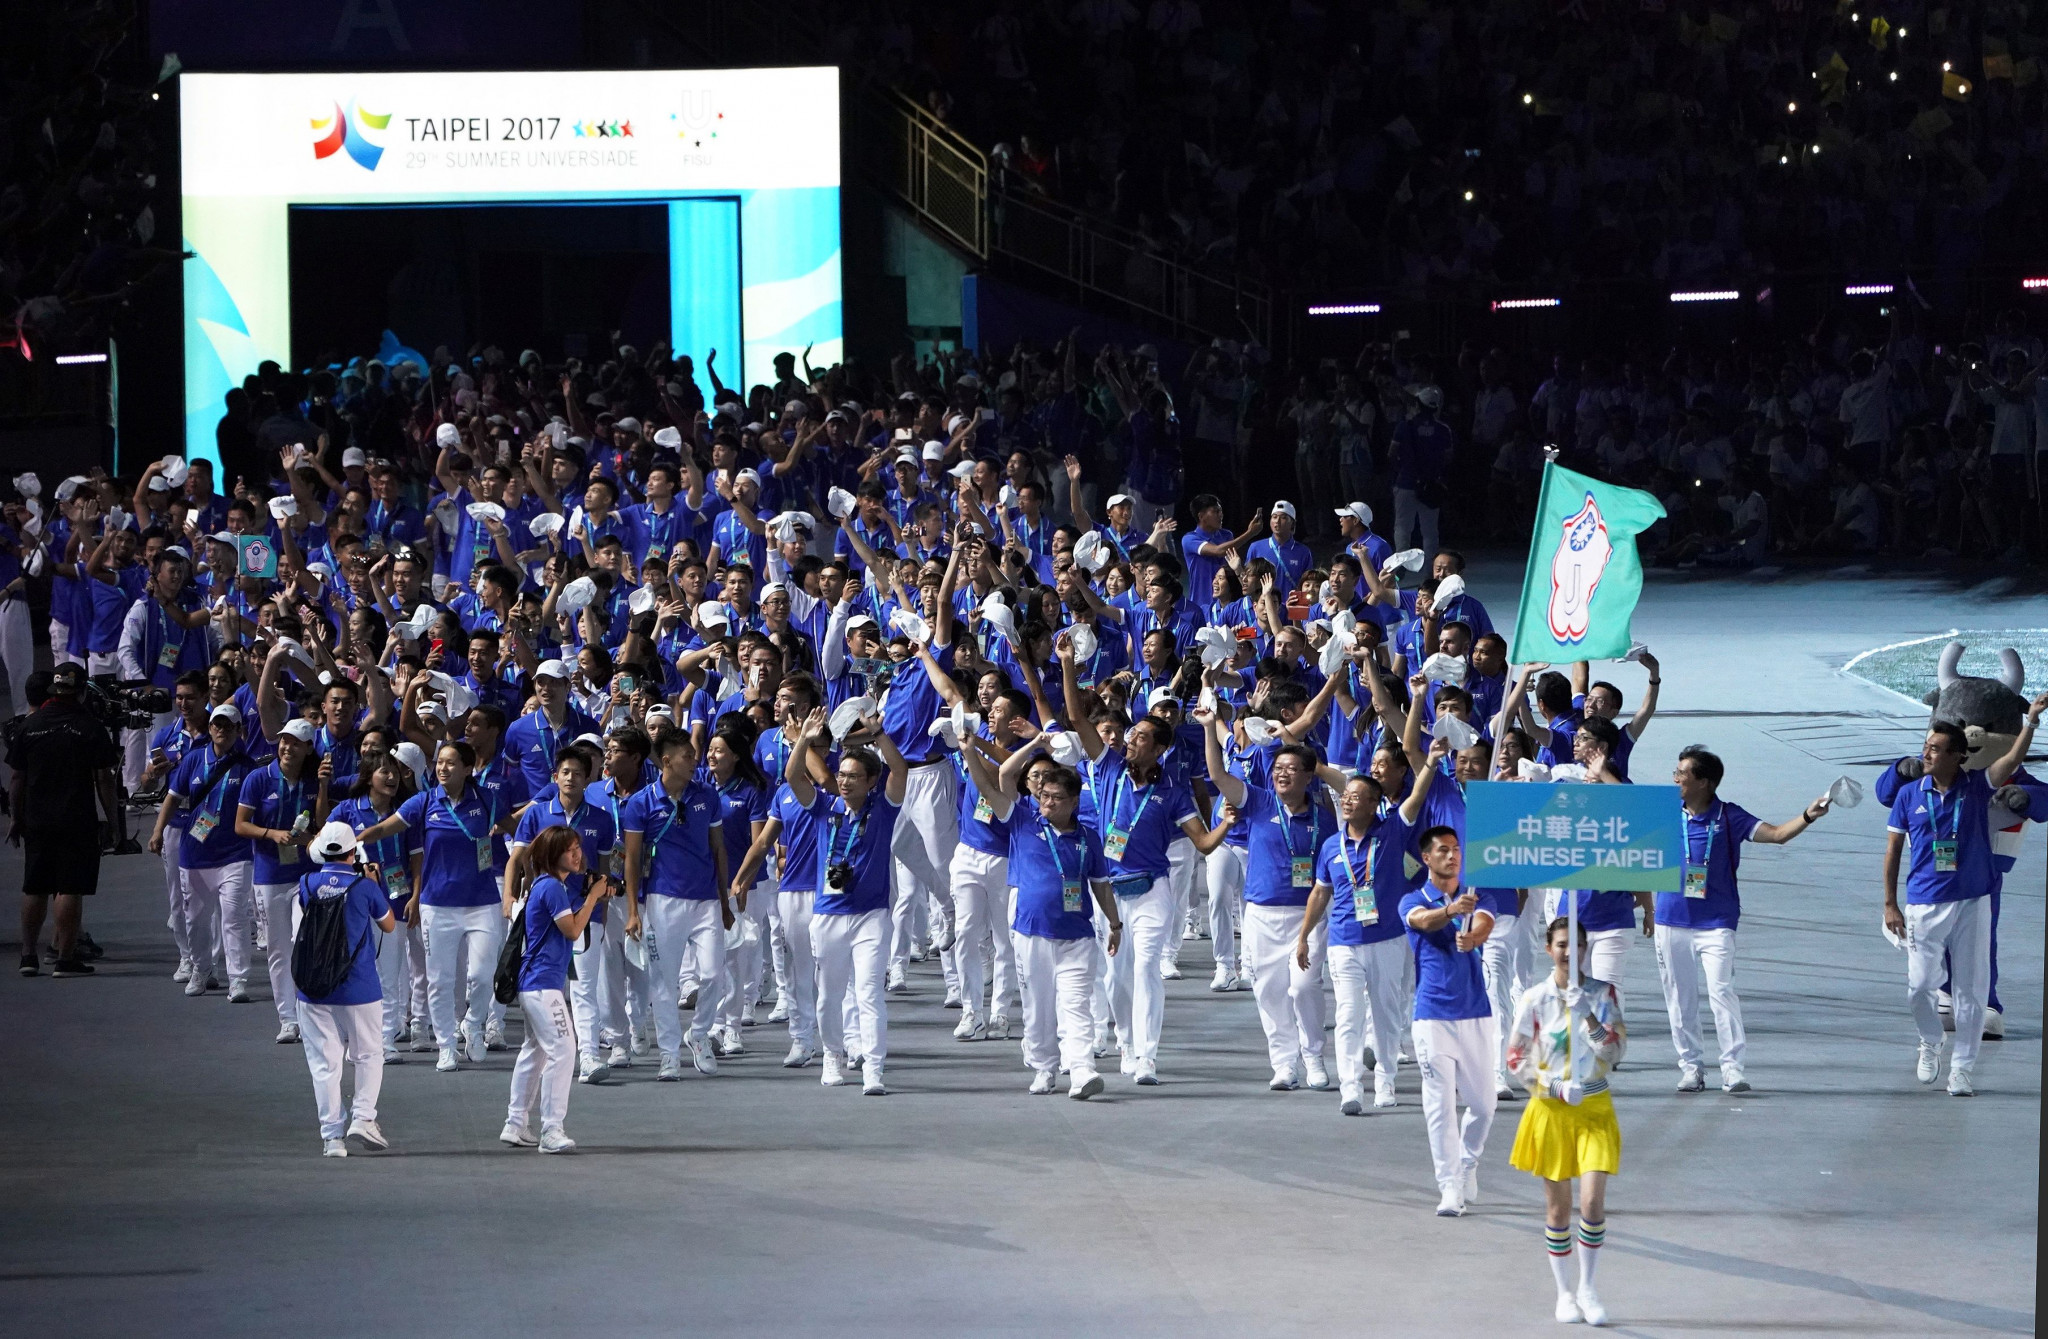 Three suspects charged over Taipei 2017 Opening Ceremony disturbances